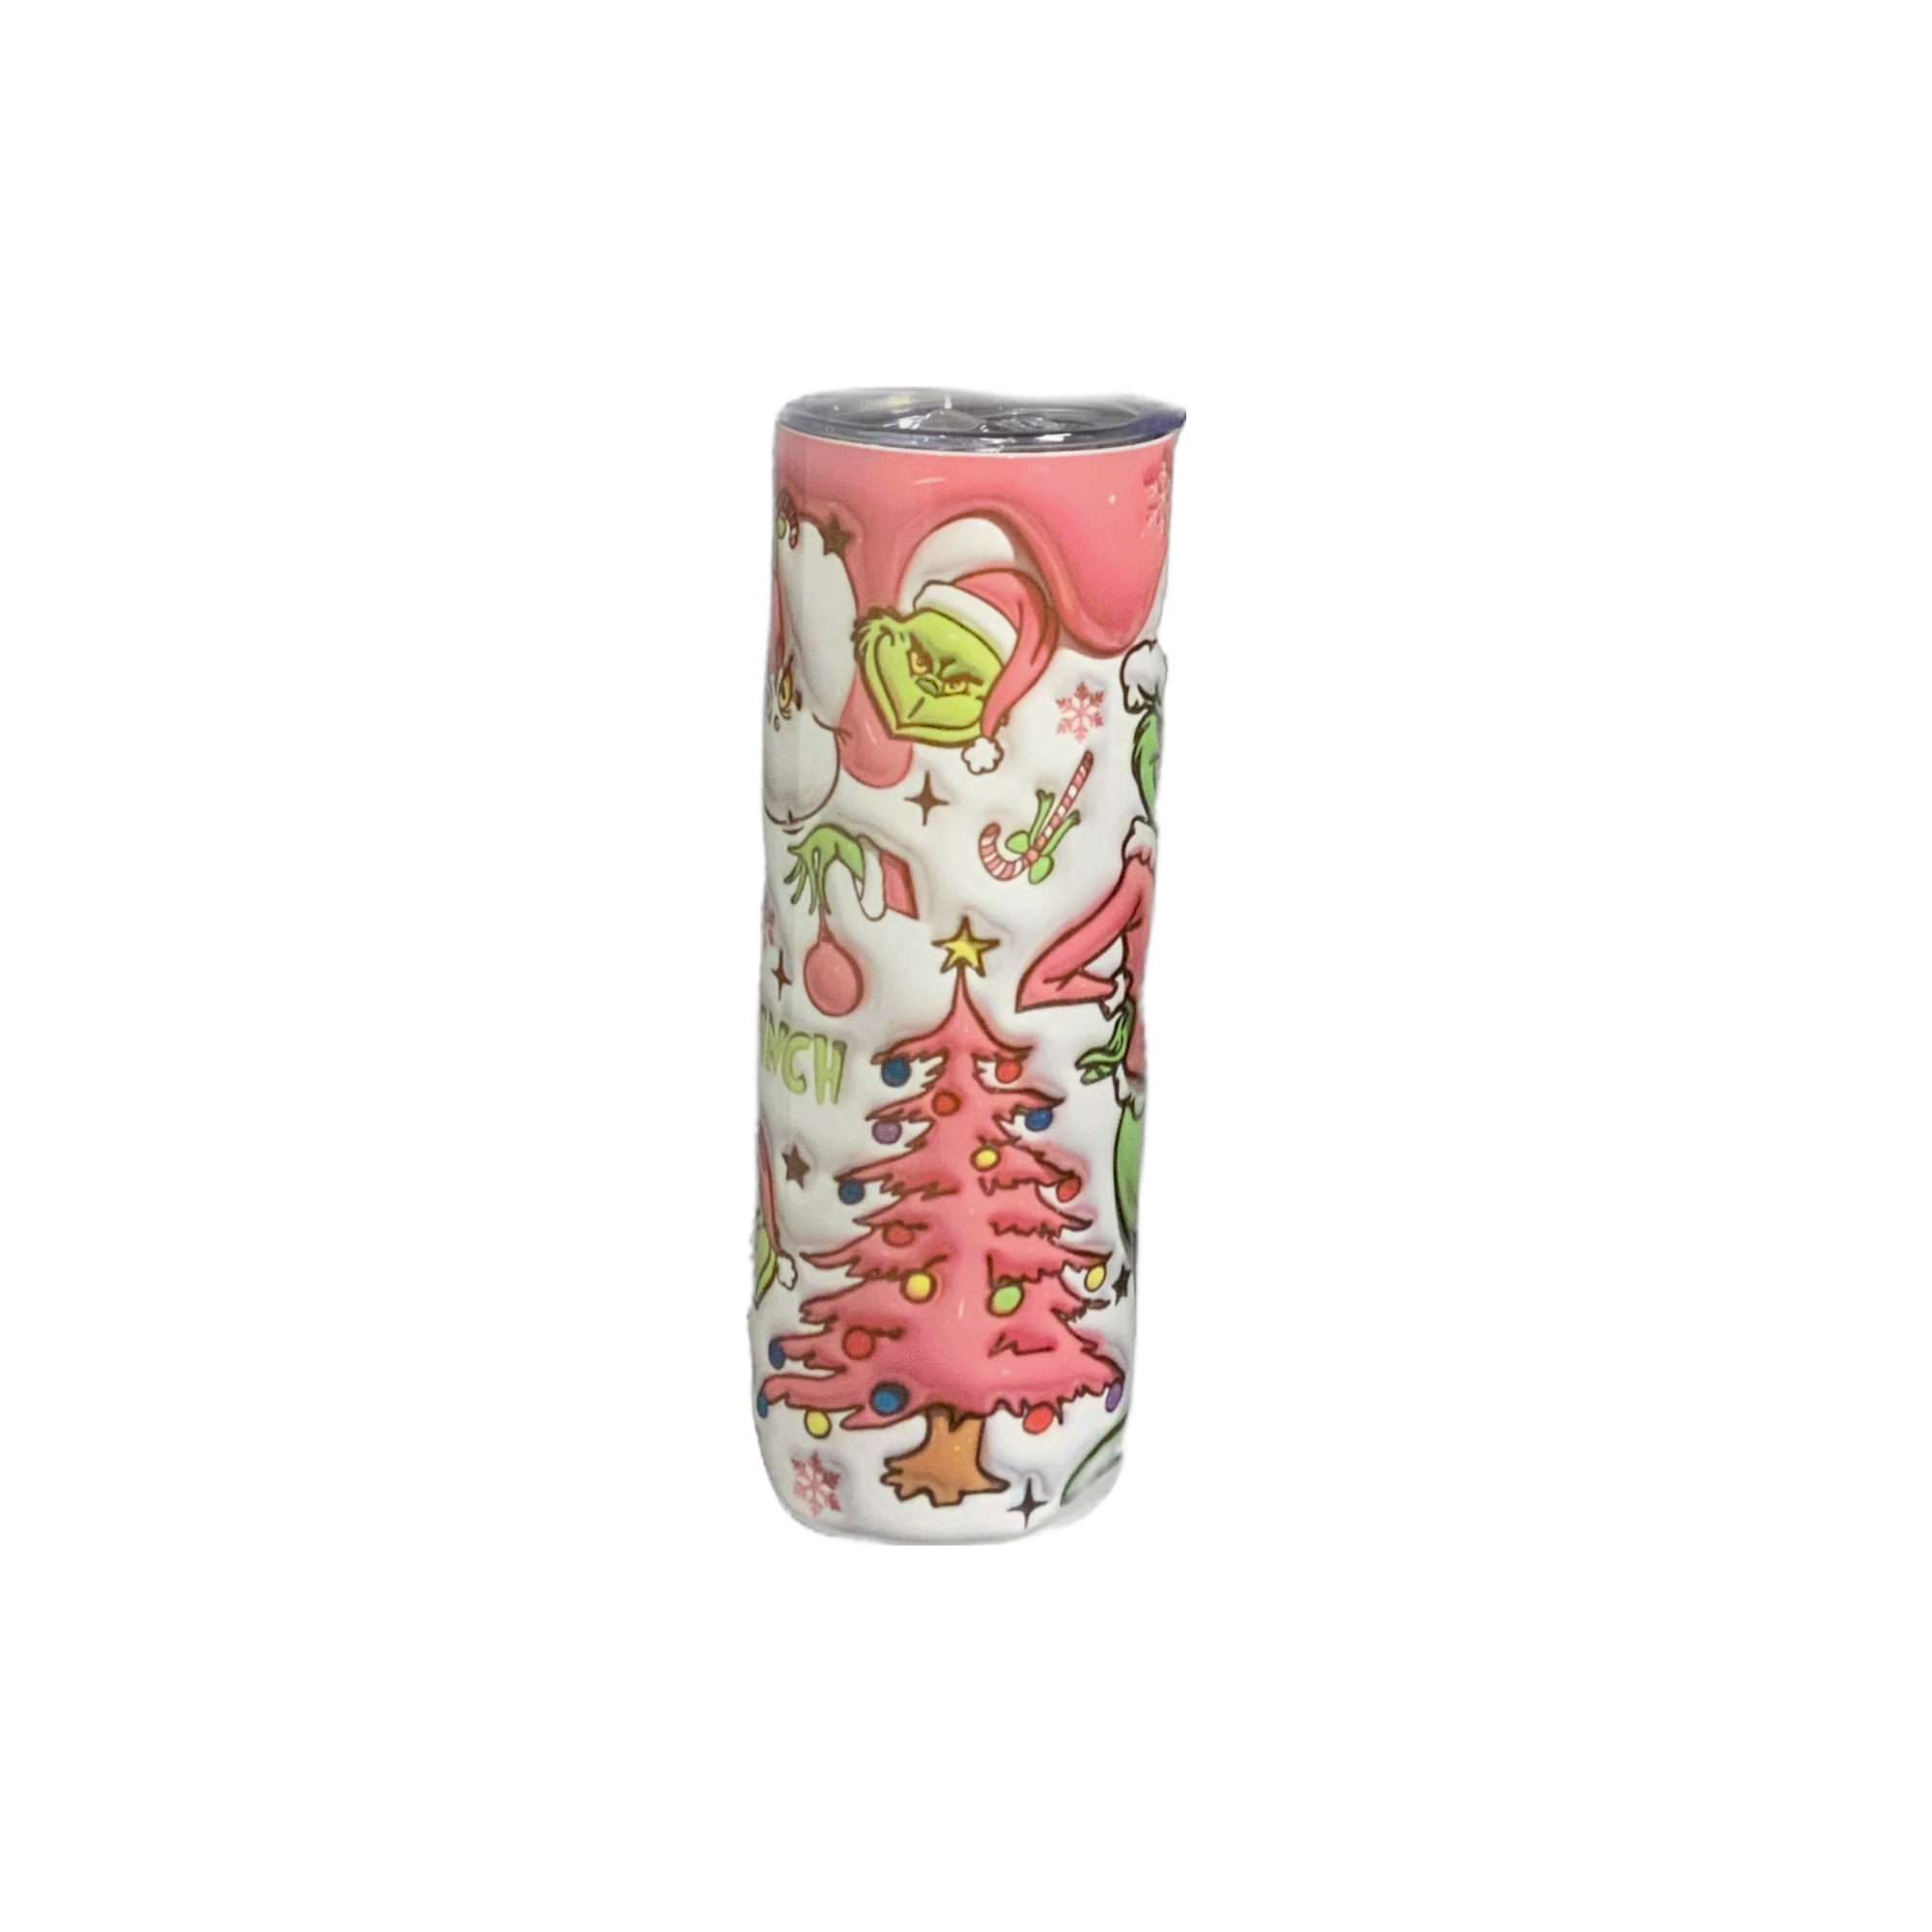 Merry Grinchmas Insulated Tumbler, Pink Santa Suit | NOLA Gifts and Decor